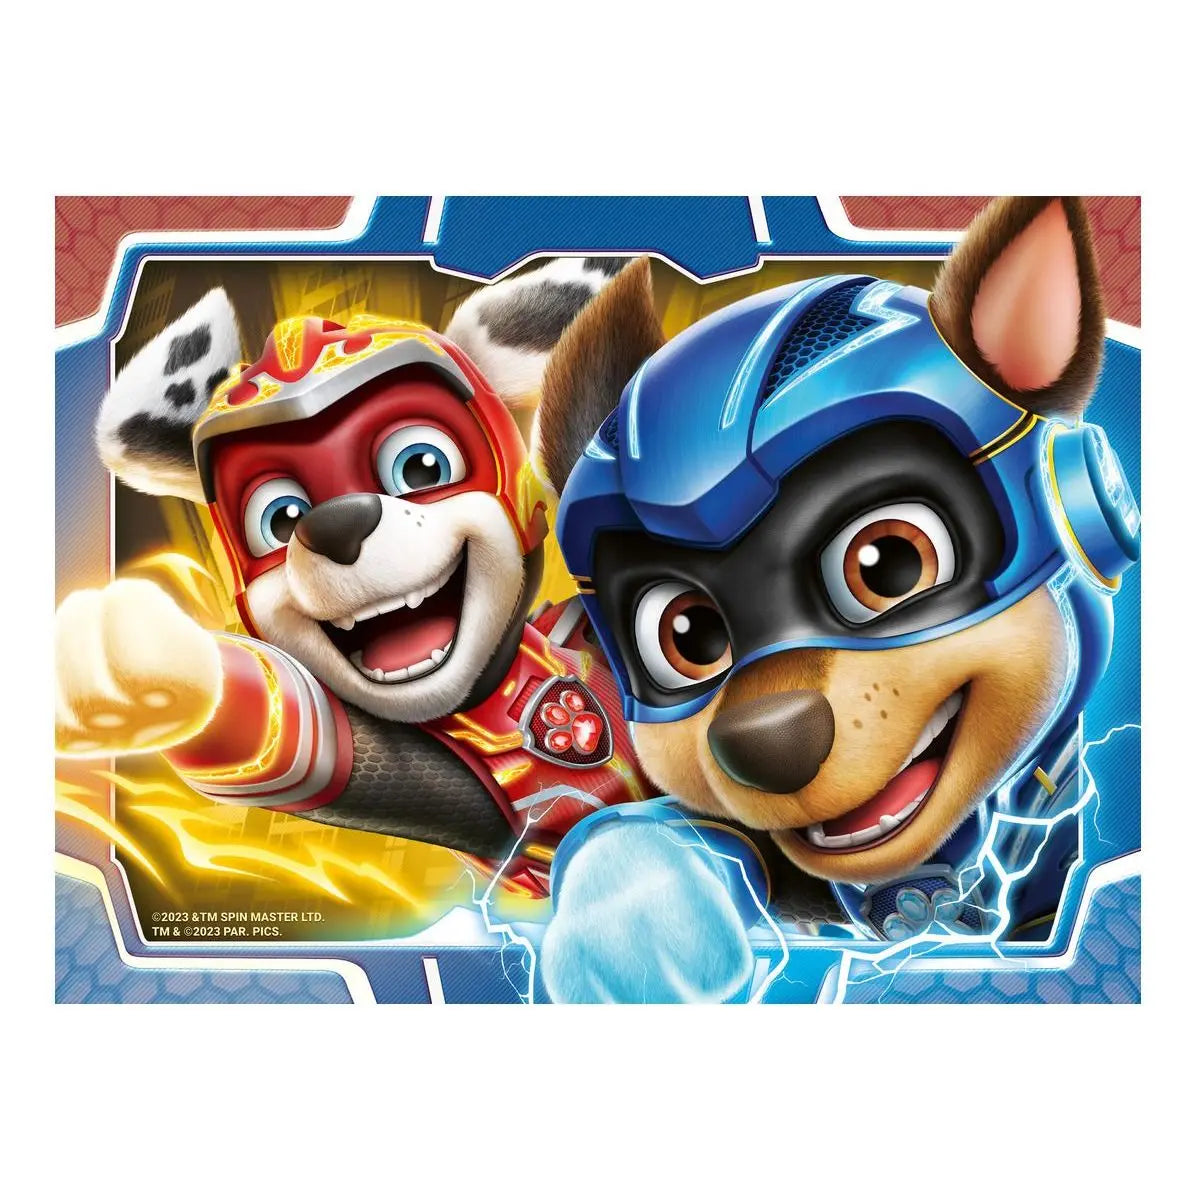 Paw Patrol Mighty Movie 4 in a Box Jigsaw Puzzle Ravensburger